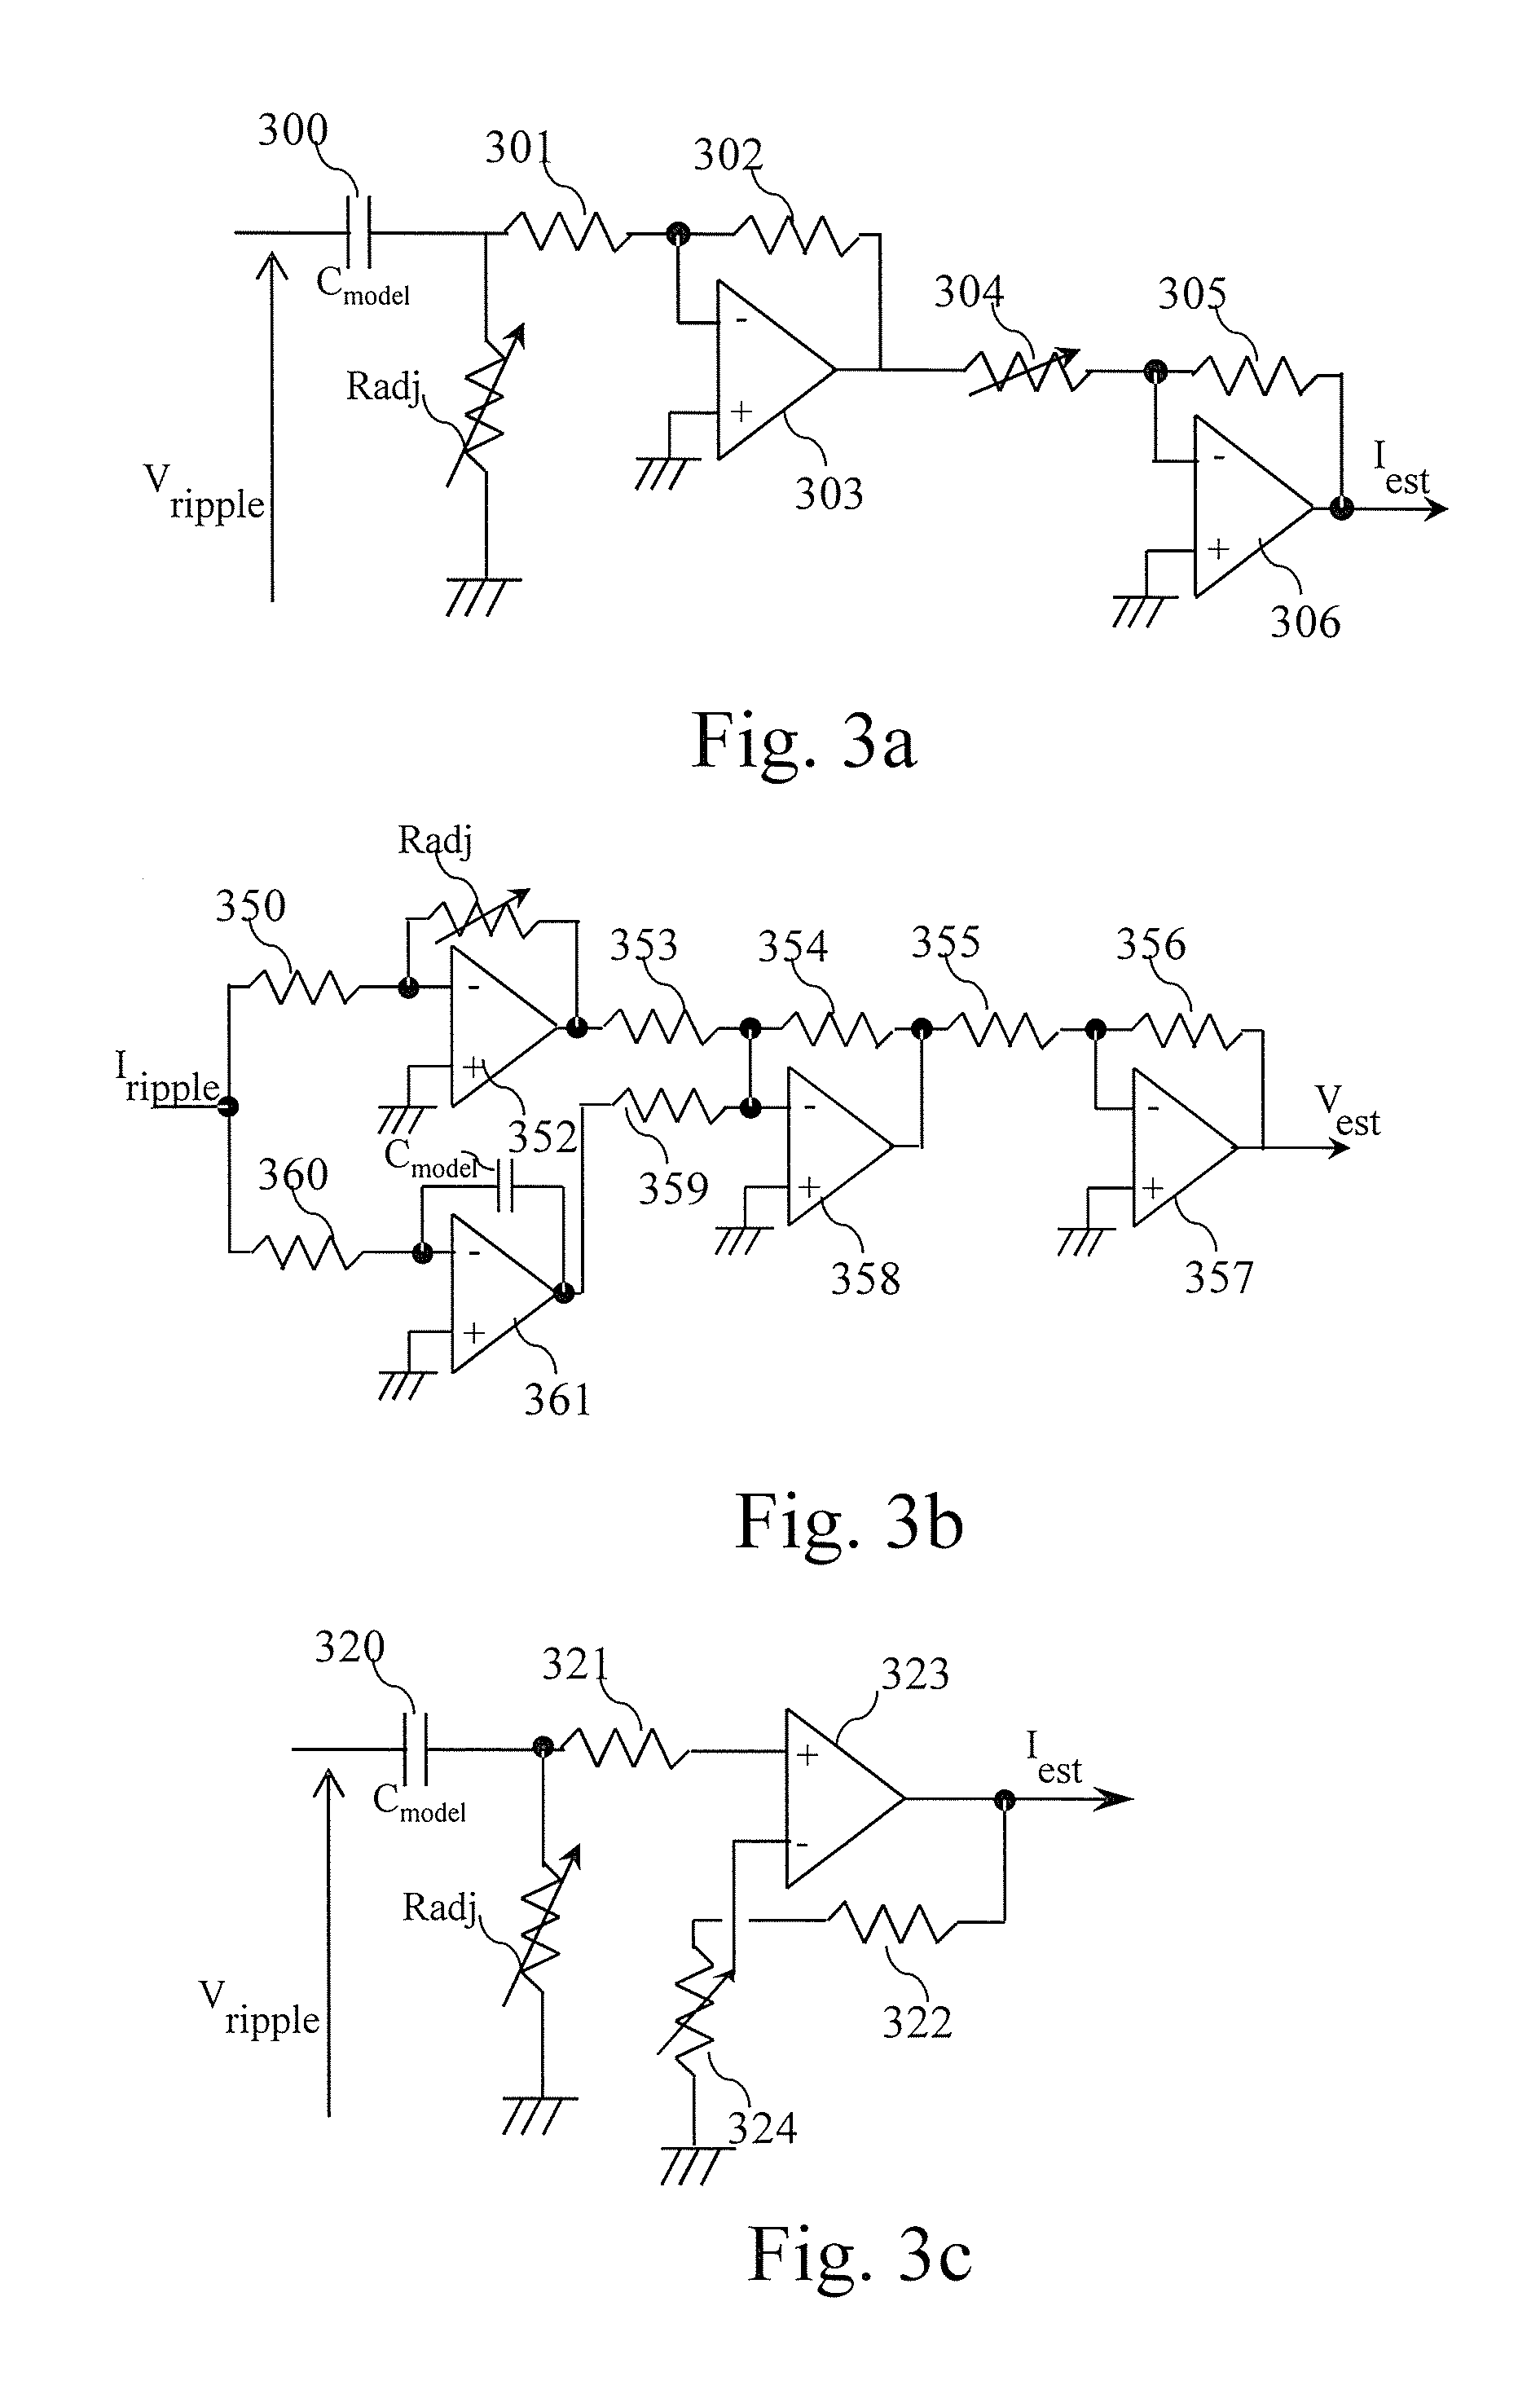 Method and system for on-line monitoring electrolytic capacitor condition